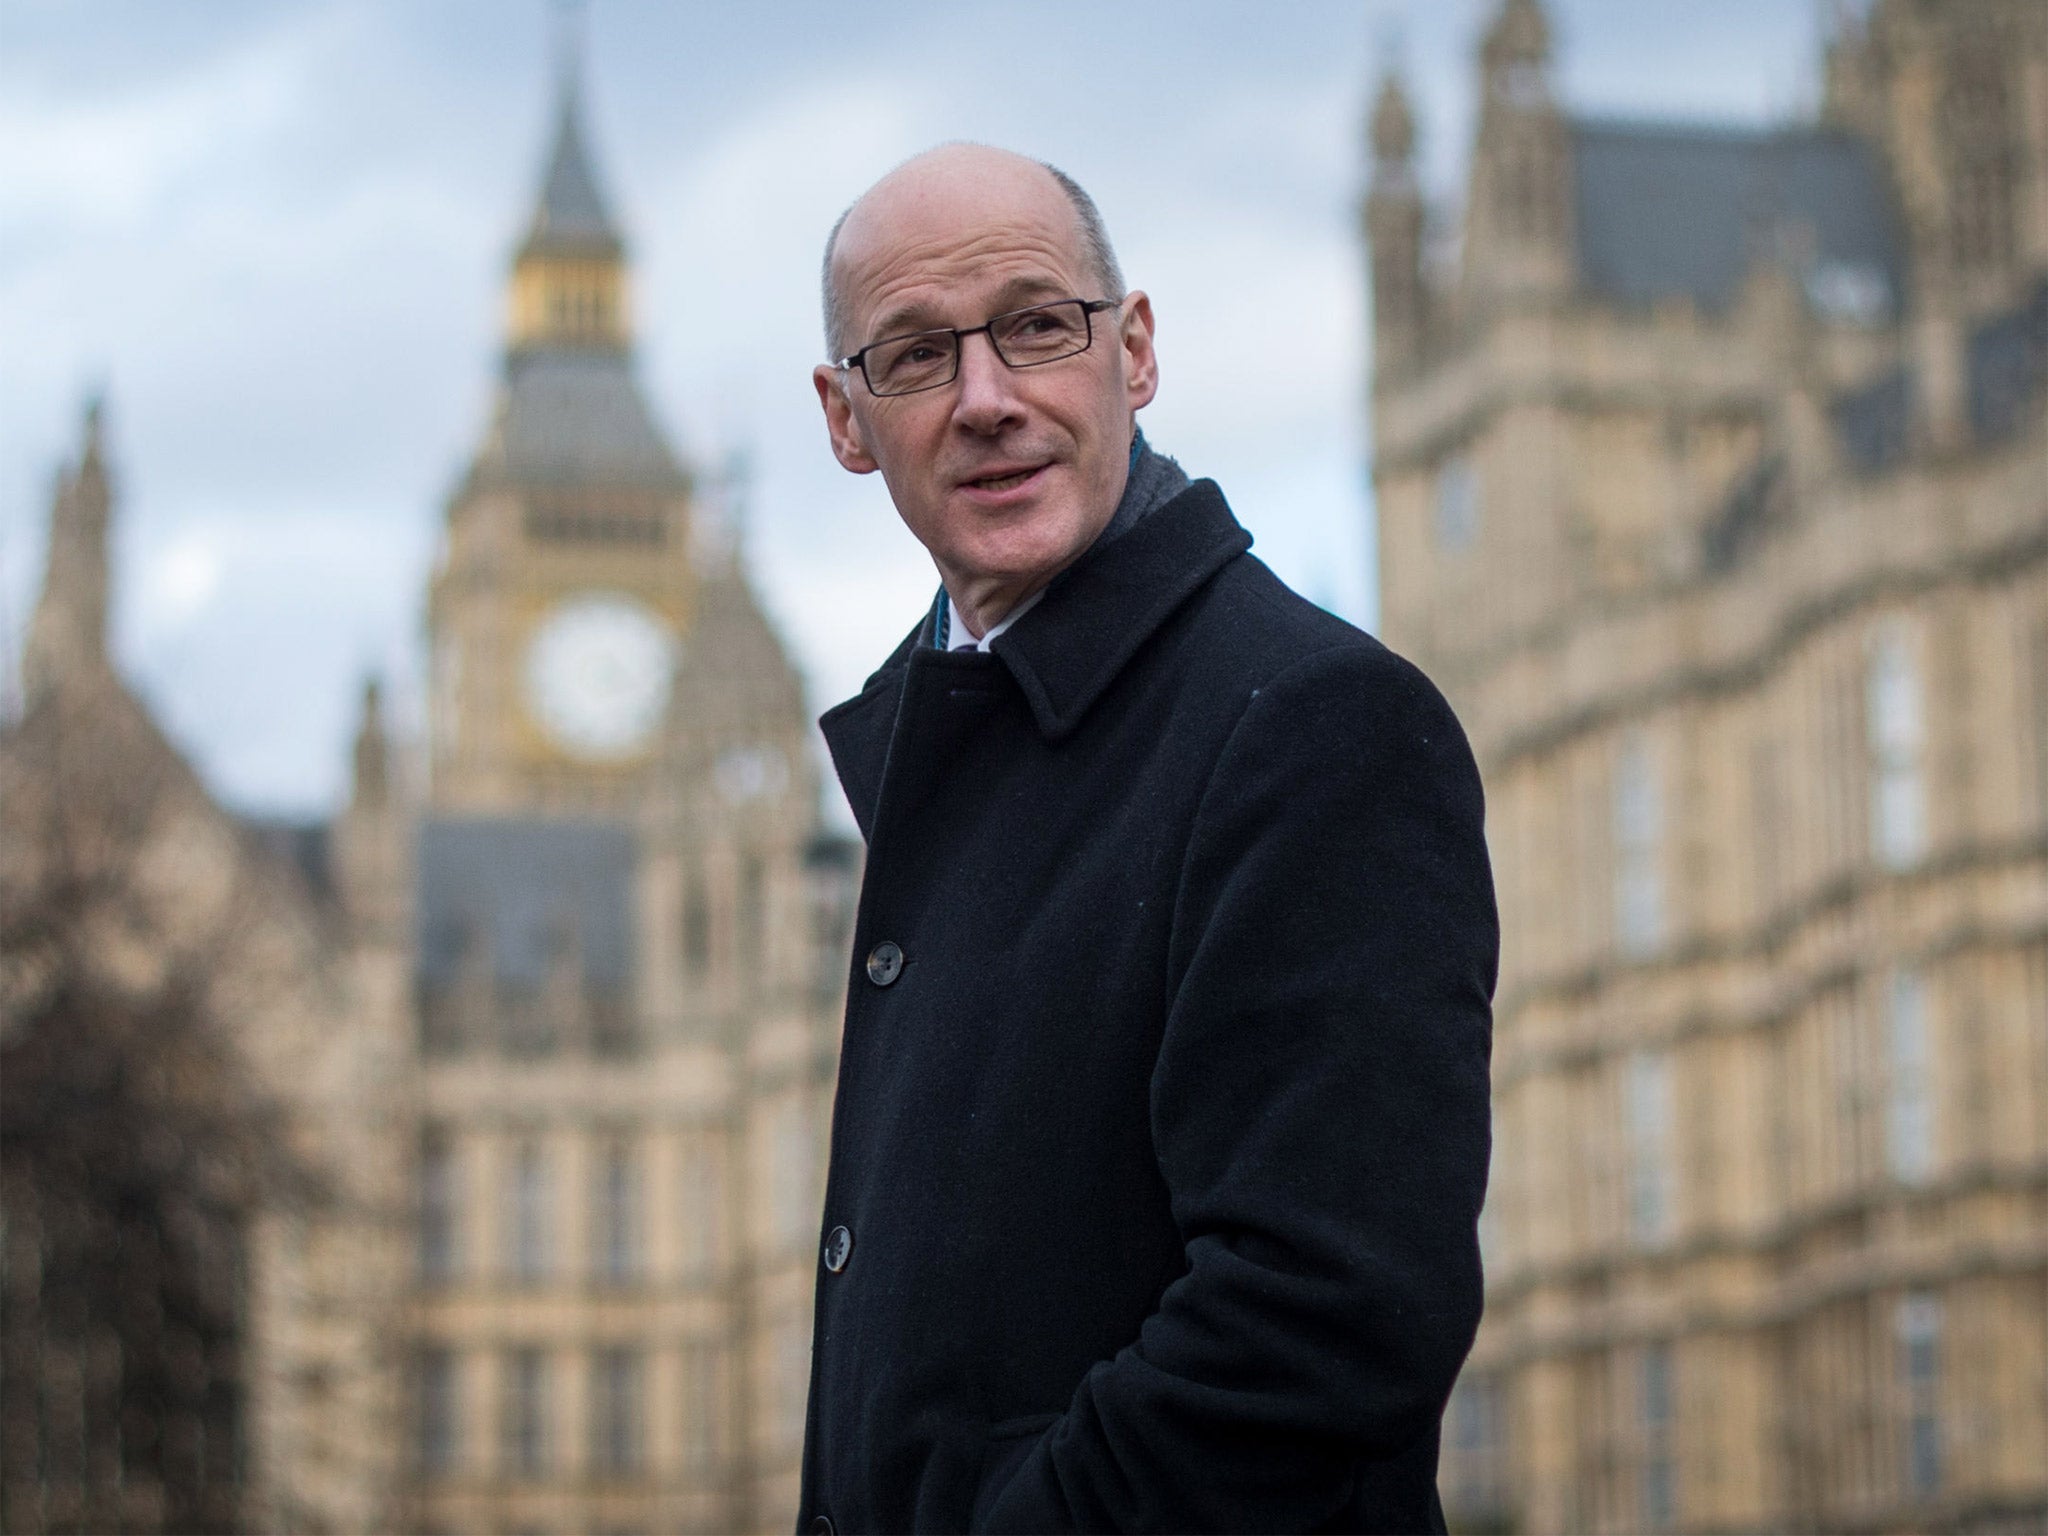 The Scottish Government will not take control of income tax until April 2017, according to Finance Secretary and Deputy First Minister John Swinney